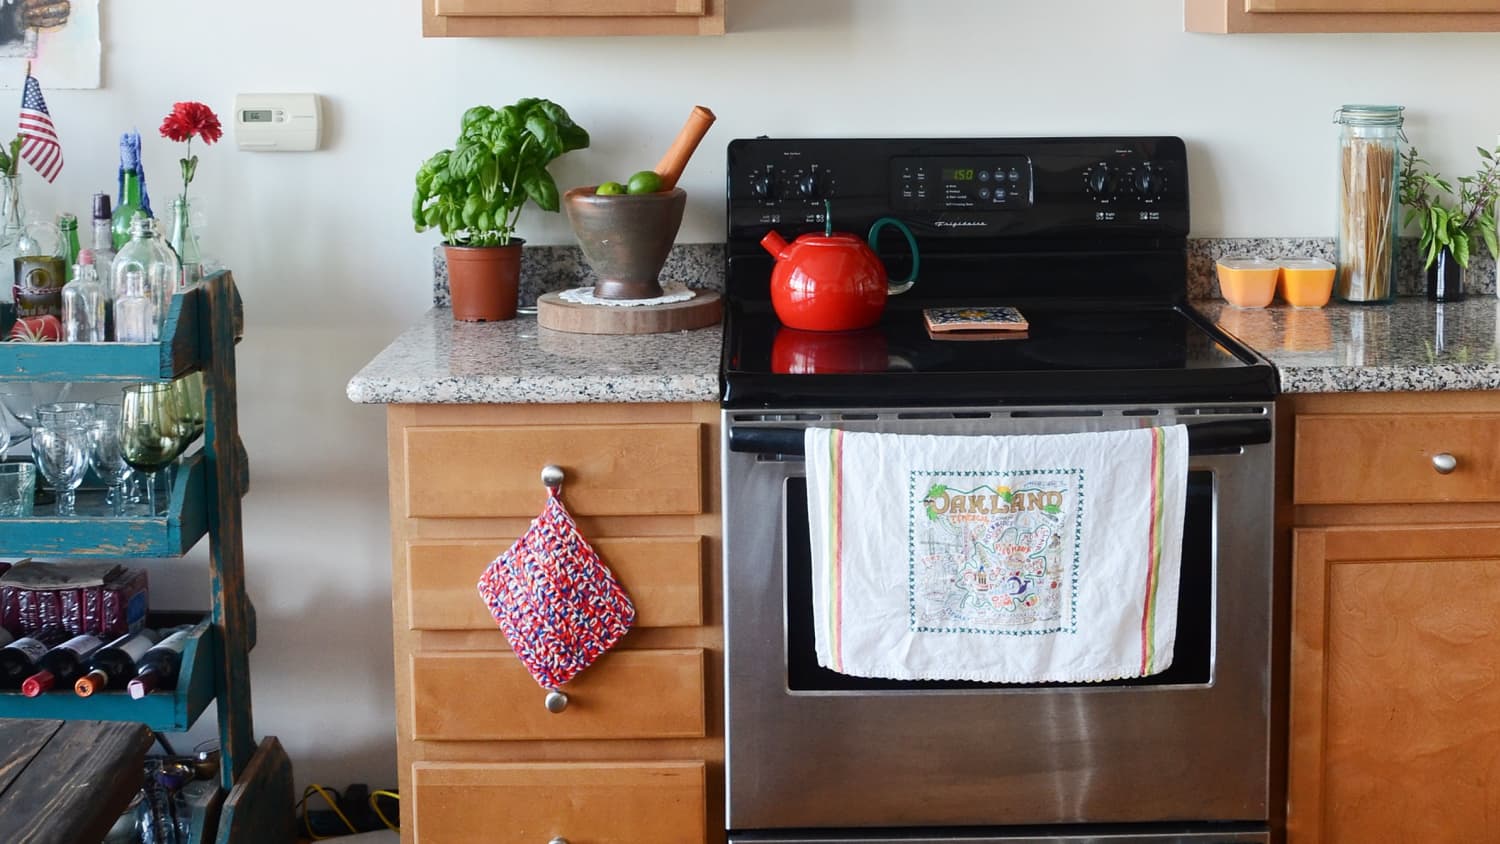 13 Kitchen Counter Decor Ideas You Should Totally Copy for Magazine-Worthy  Style